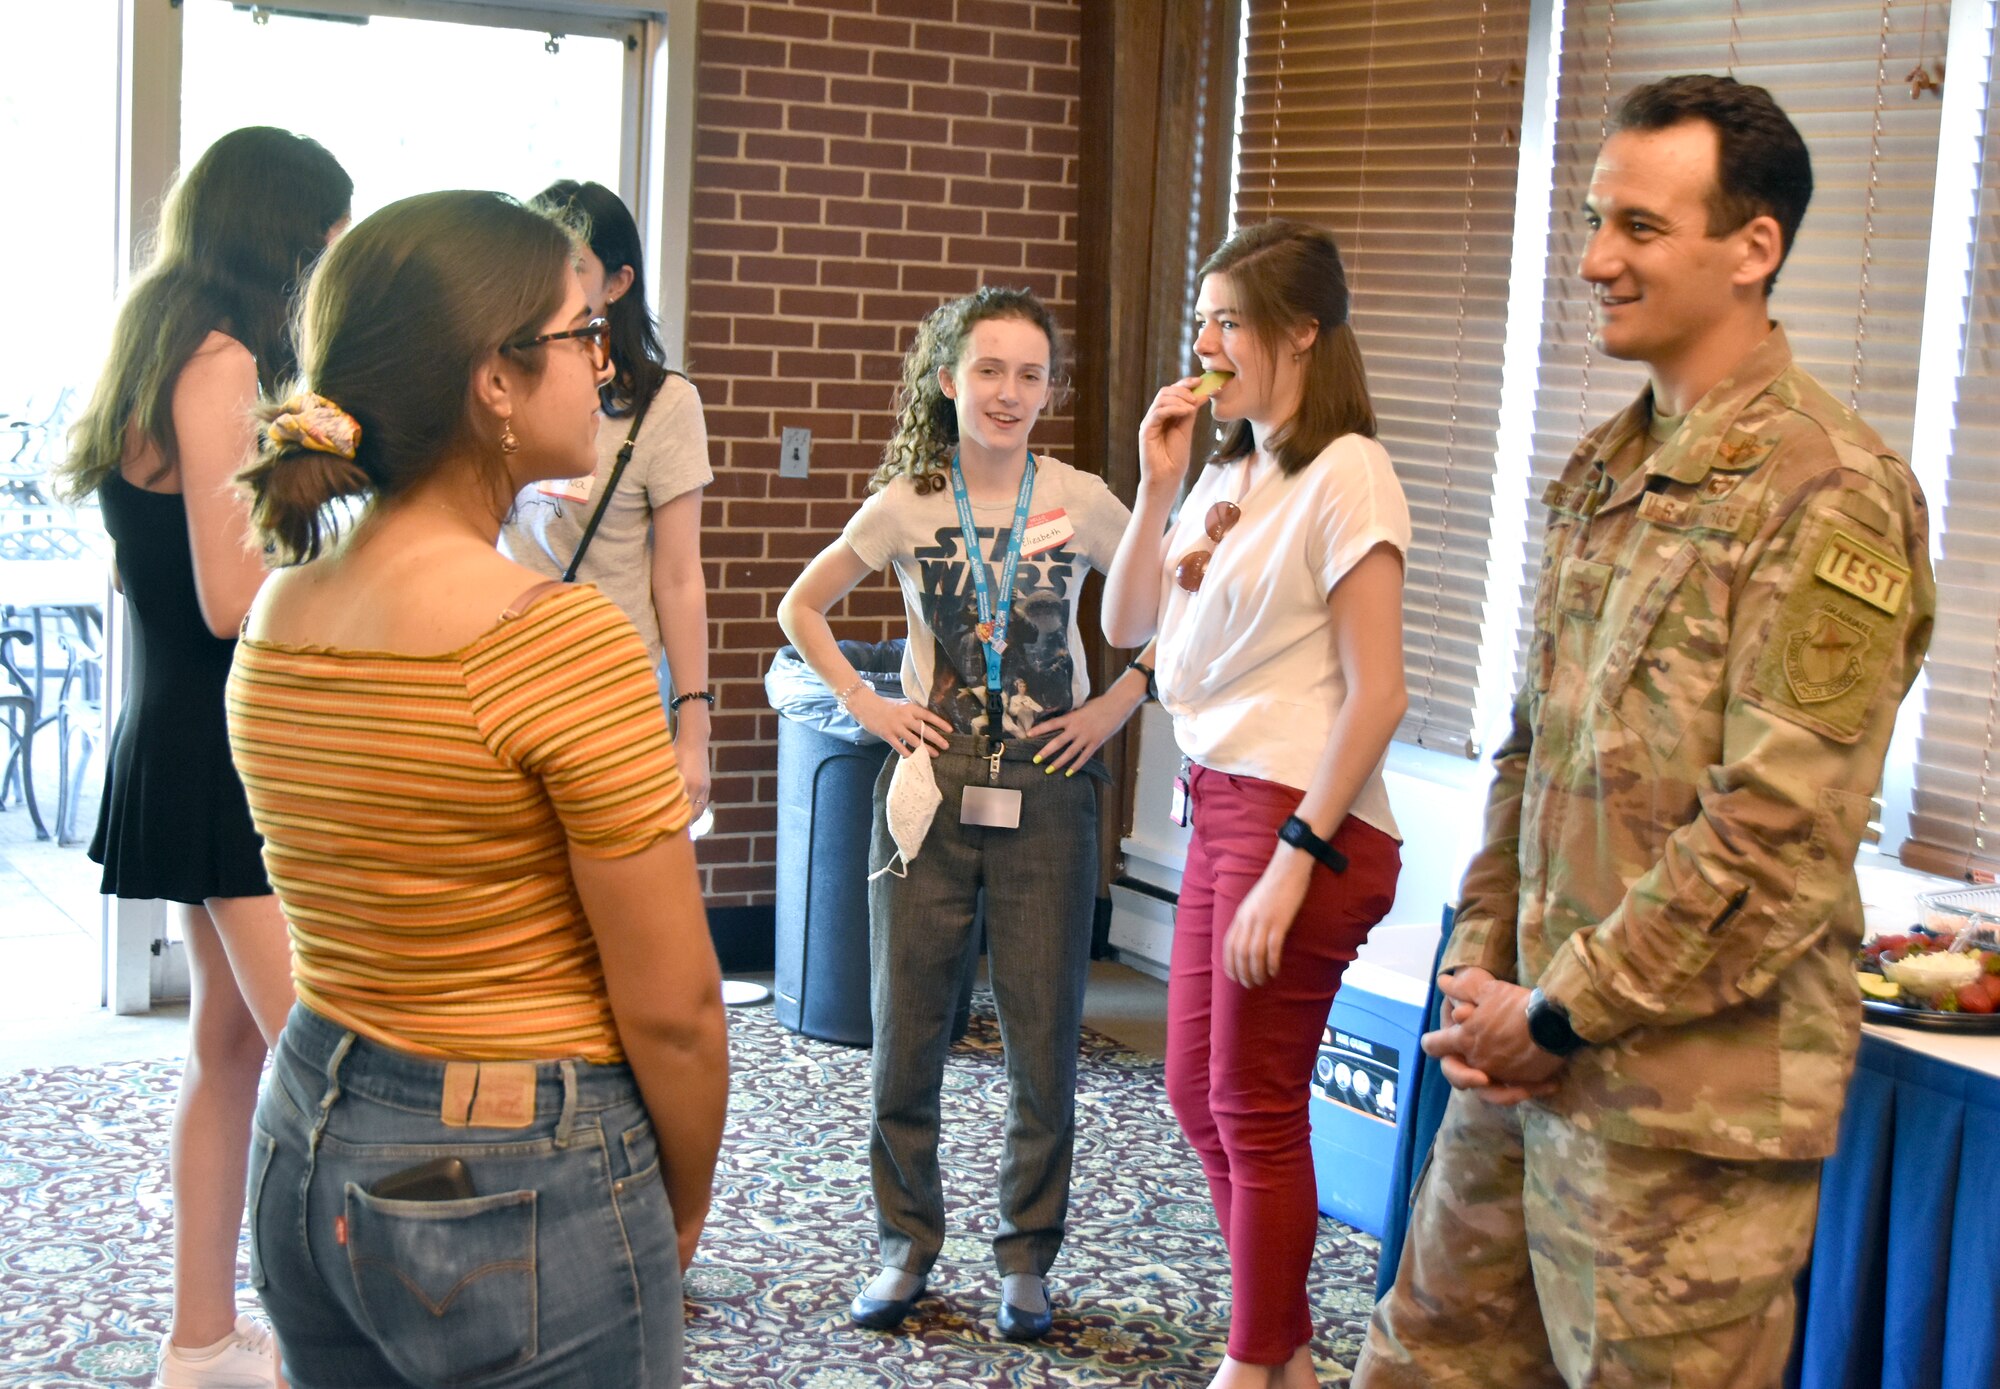 Maria Urdaneta, left, speaks with Col. Jeffrey Geraghty, right, Arnold Engineering Development Complex commander, at a social event June 17, 2021, at the Arnold Lakeside Complex on Arnold Air Force Base, Tenn., held as part of the summer internship program. Leadership with the Department of Defense and National Aerospace Solutions, LLC, were in attendance to welcome the interns. (U.S. Air Force photo by Bradley Hicks) (This image has been altered by obscuring badges for security purposes.)